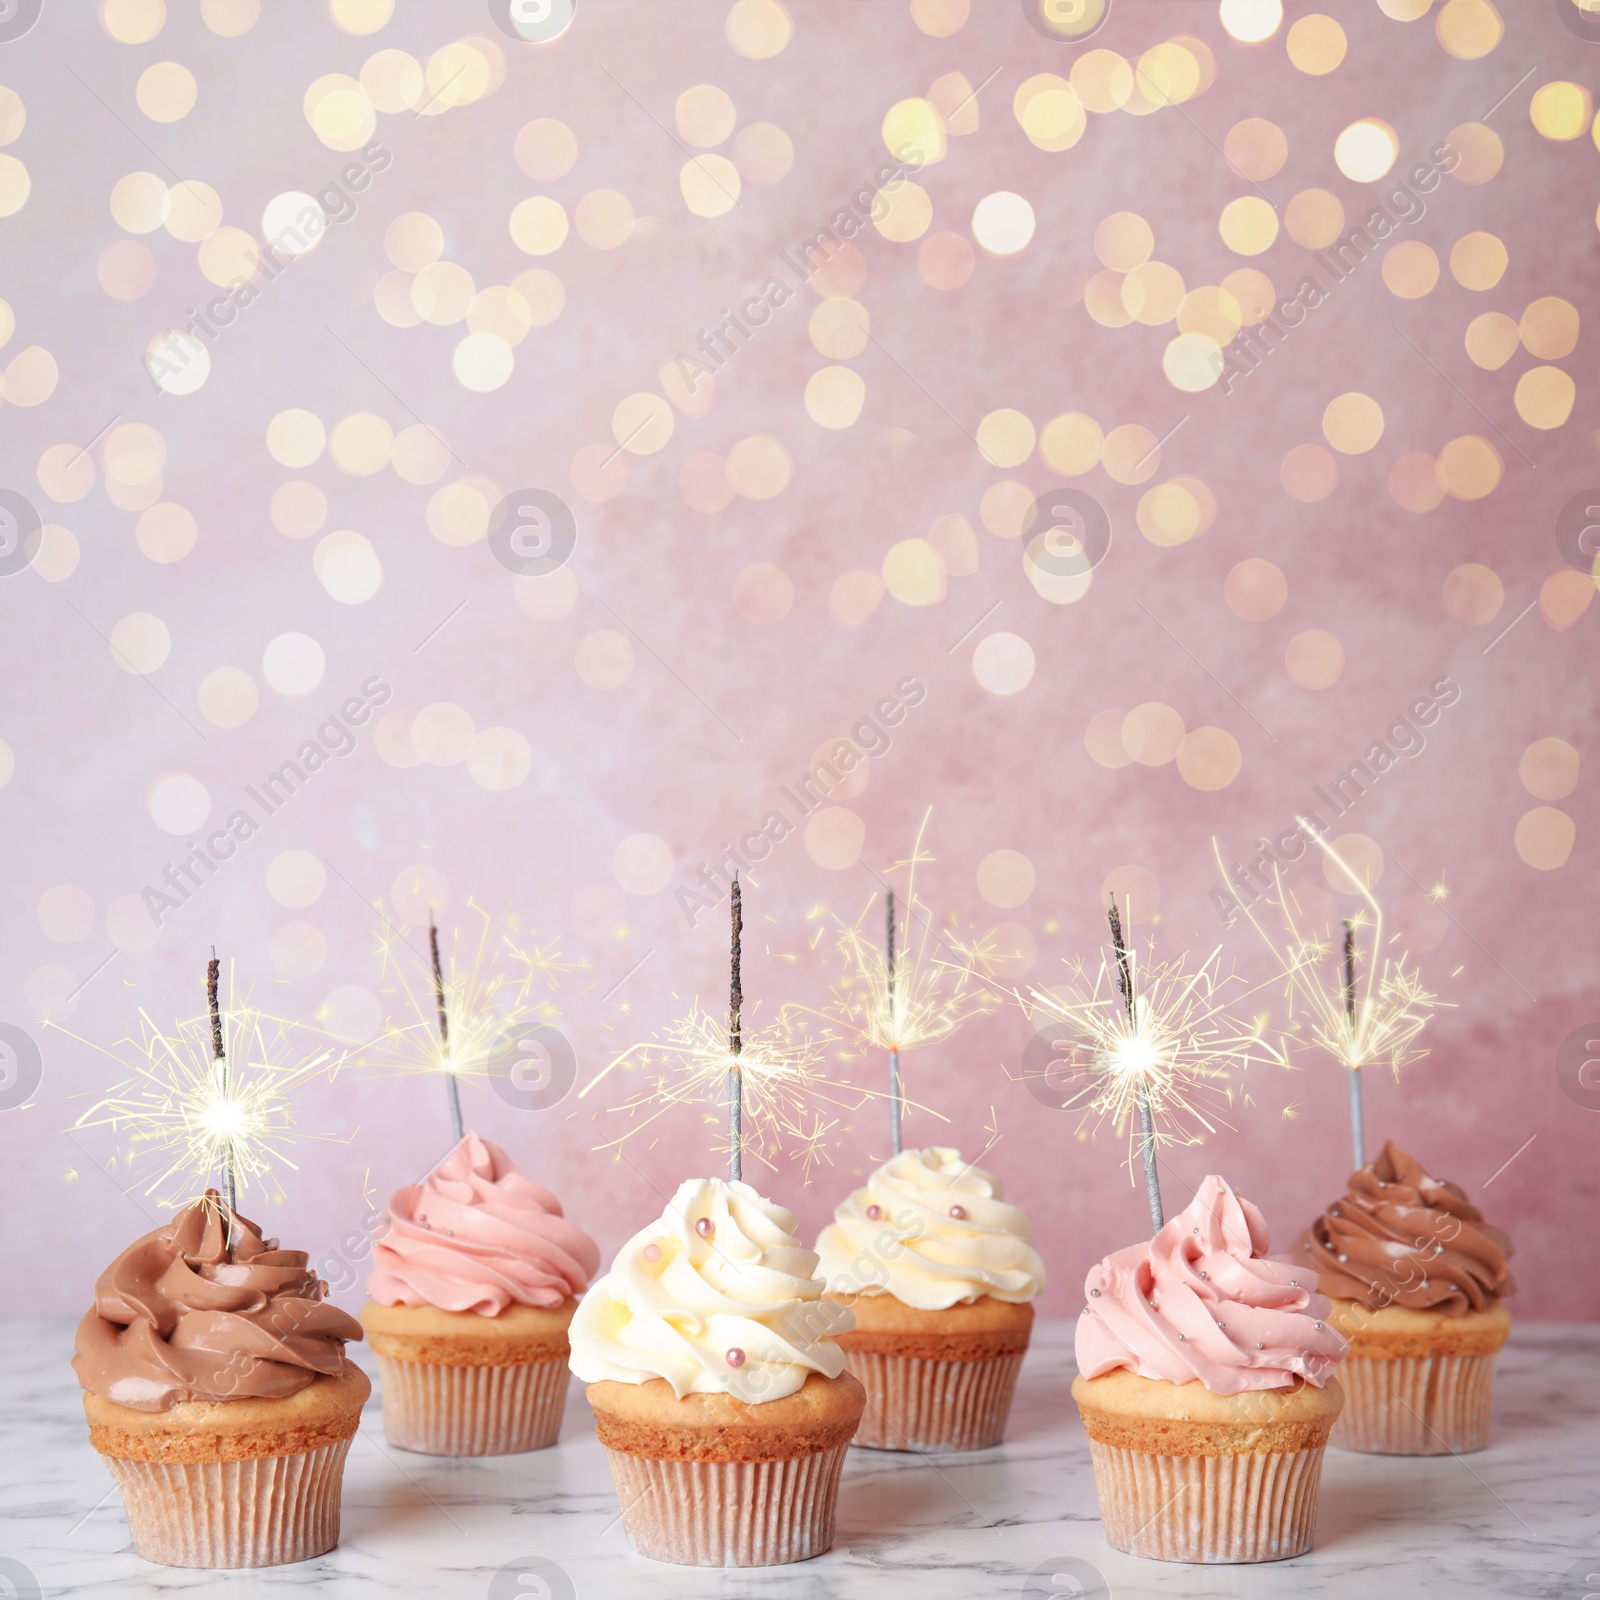 Image of Birthday cupcakes with sparklers on table against light pink background